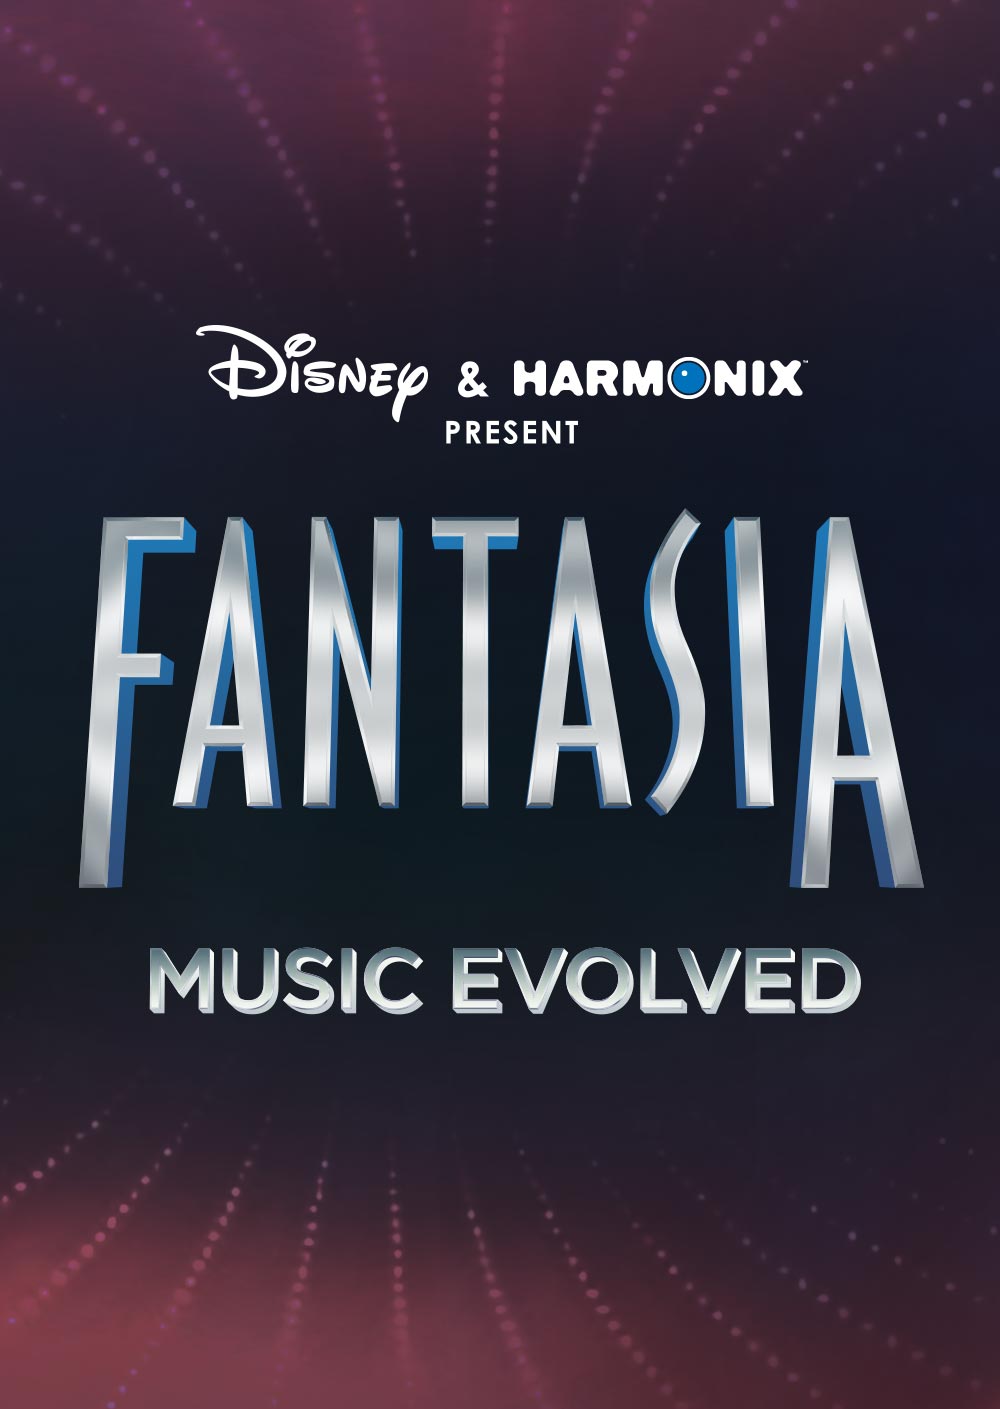 Disney Interactive and Harmonix reveal additional hit songs for Disney Fantasia Music Evolved